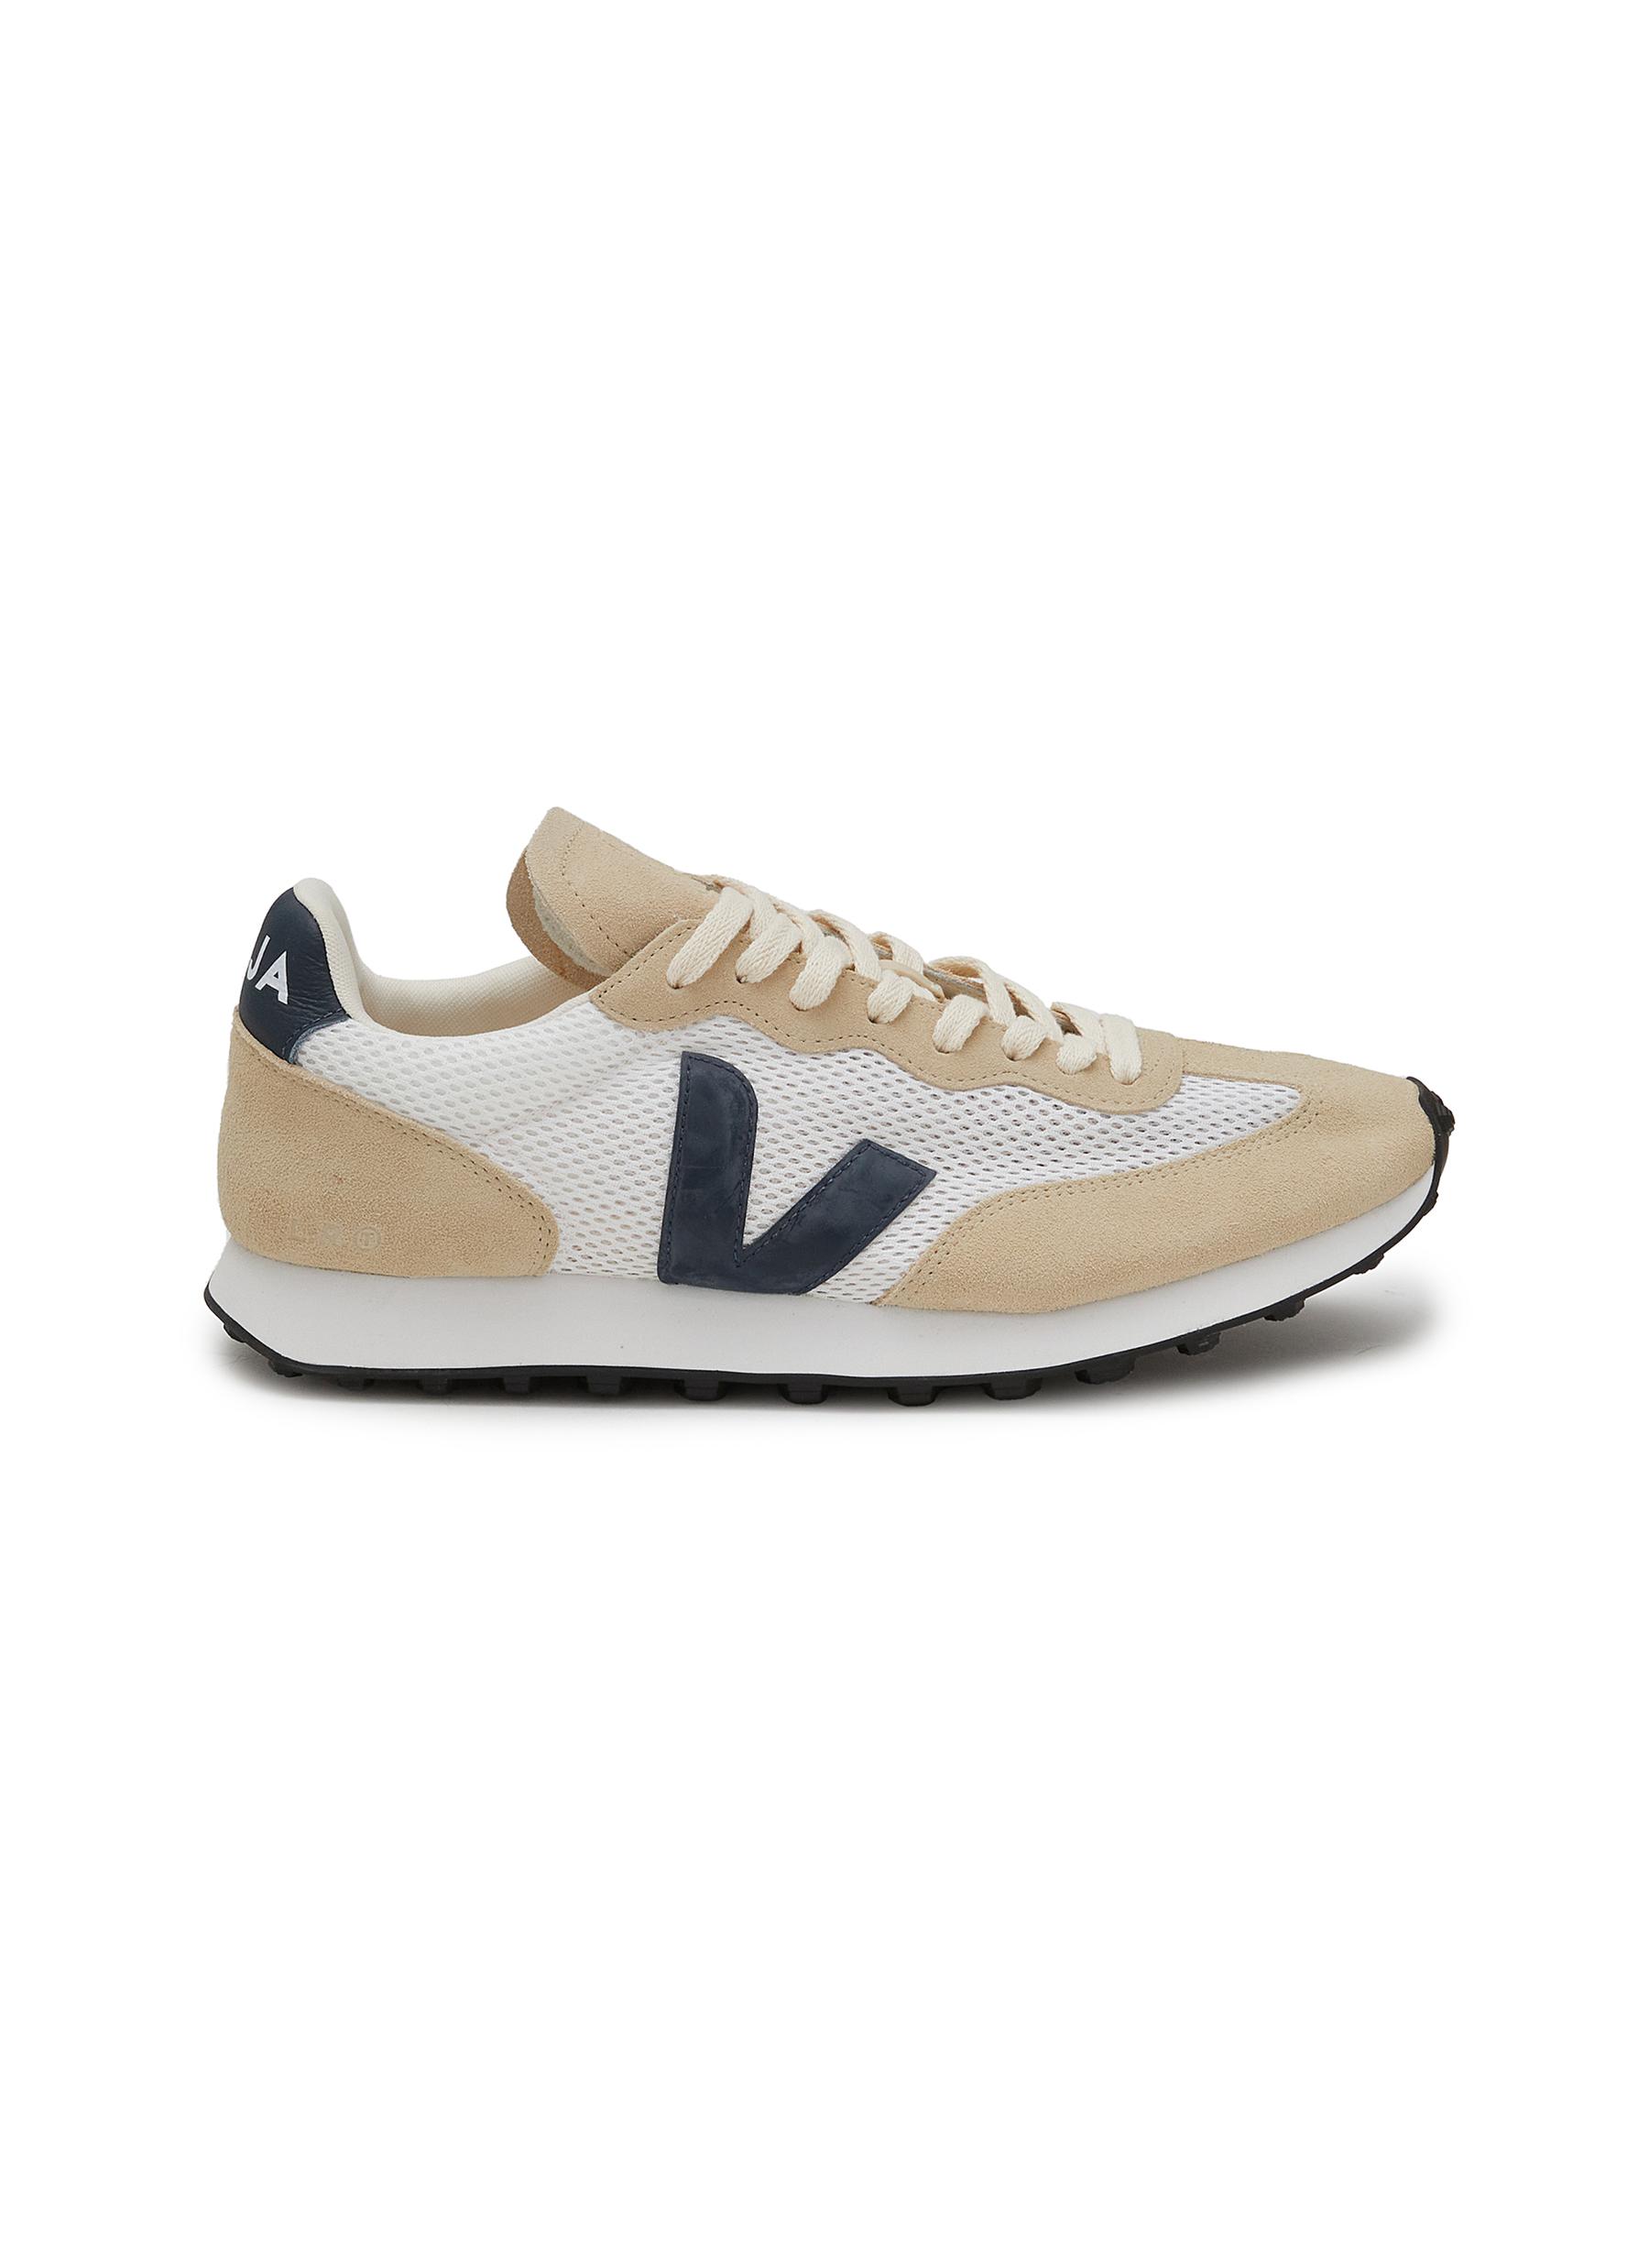 VEJA | Rio Branco Aircell Lace Up Sneakers | Men | Lane Crawford